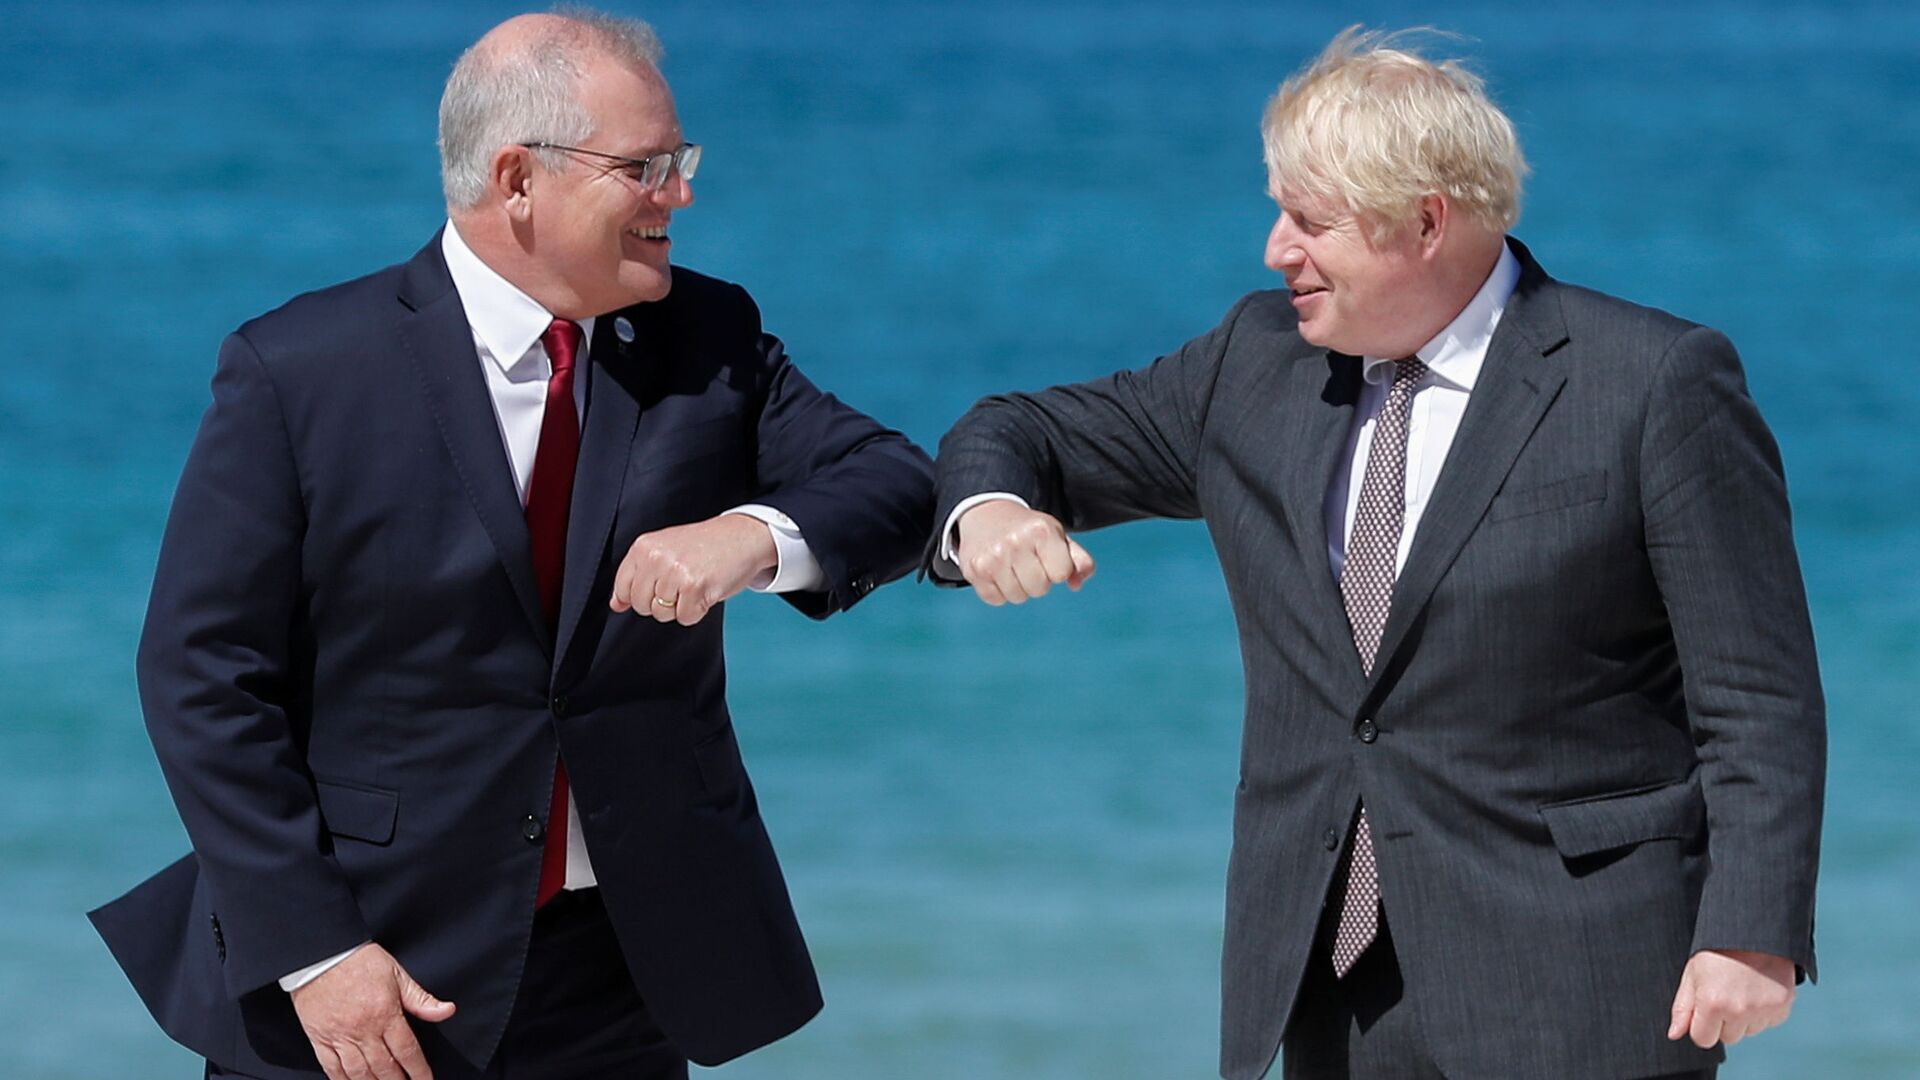 Britain's Prime Minister Boris Johnson greets Australia's Prime Minister Scott Morrison during an official welcome at the G7 summit in Carbis Bay, Cornwall, Britain, June 12, 2021.  - Sputnik International, 1920, 20.01.2022